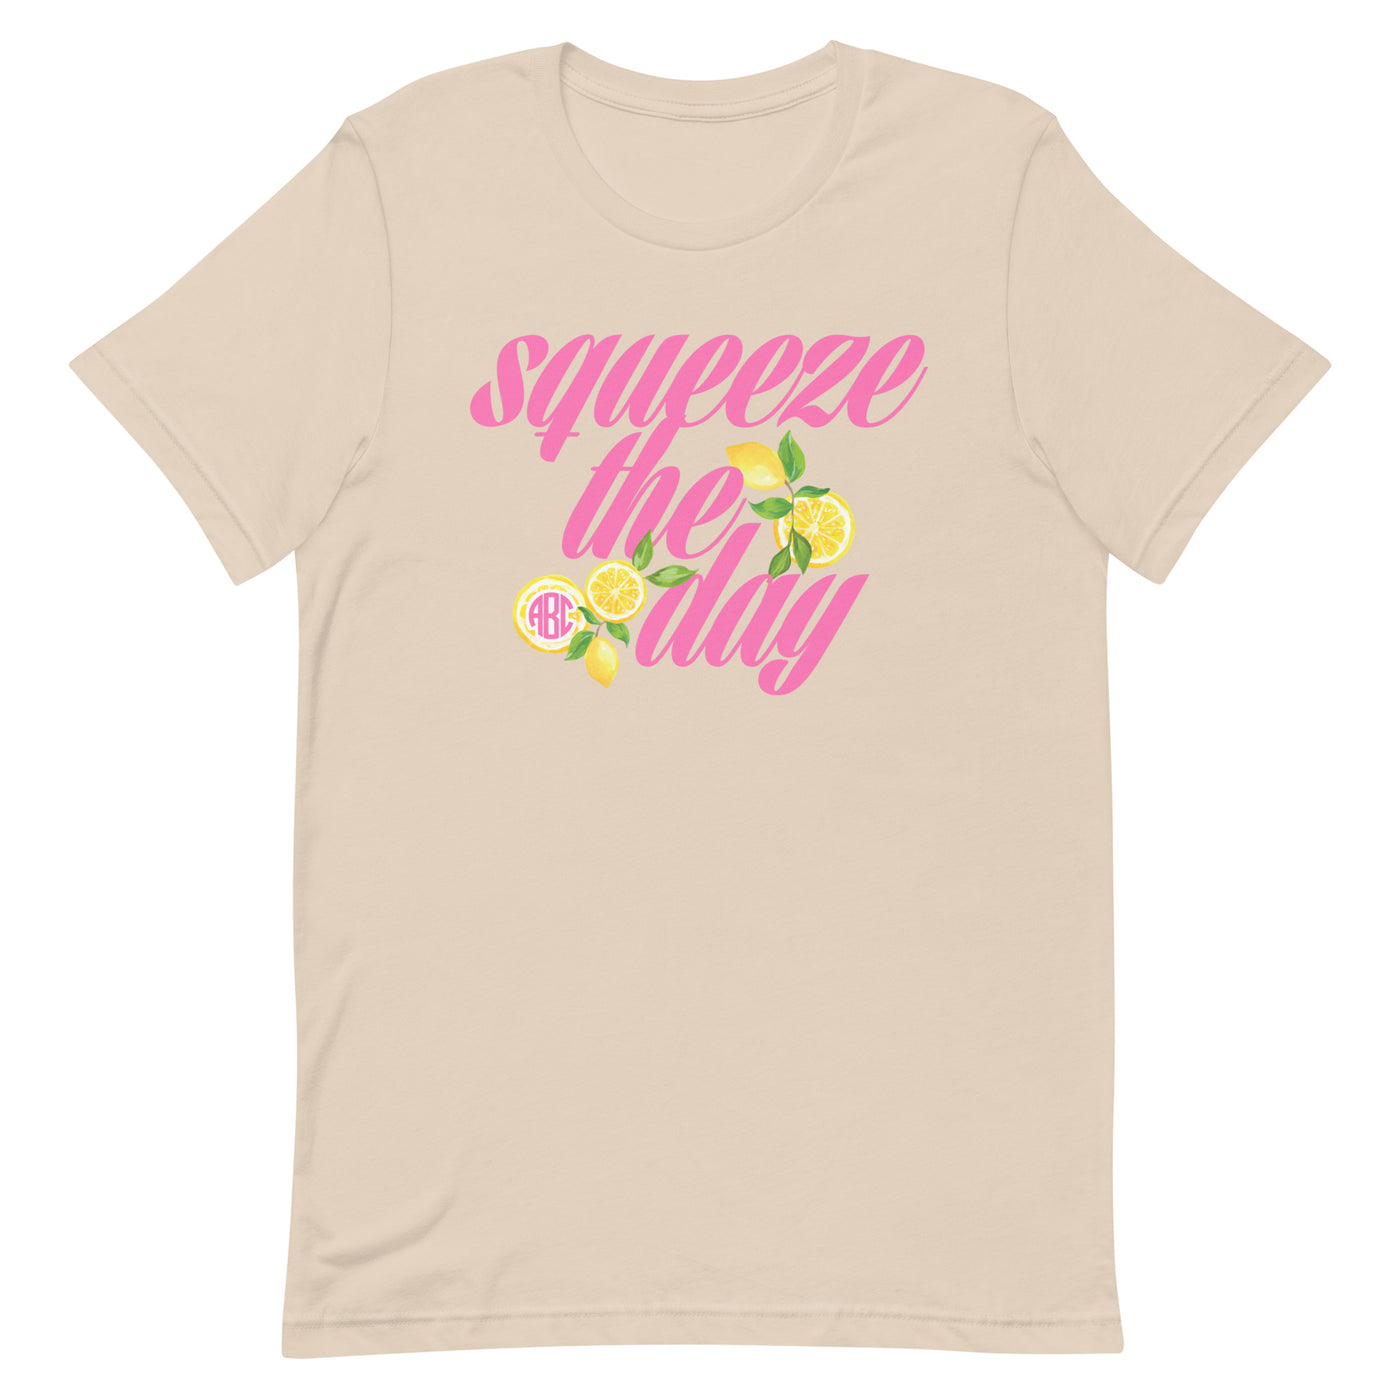 Monogrammed 'Squeeze The Day' Premium T-Shirt